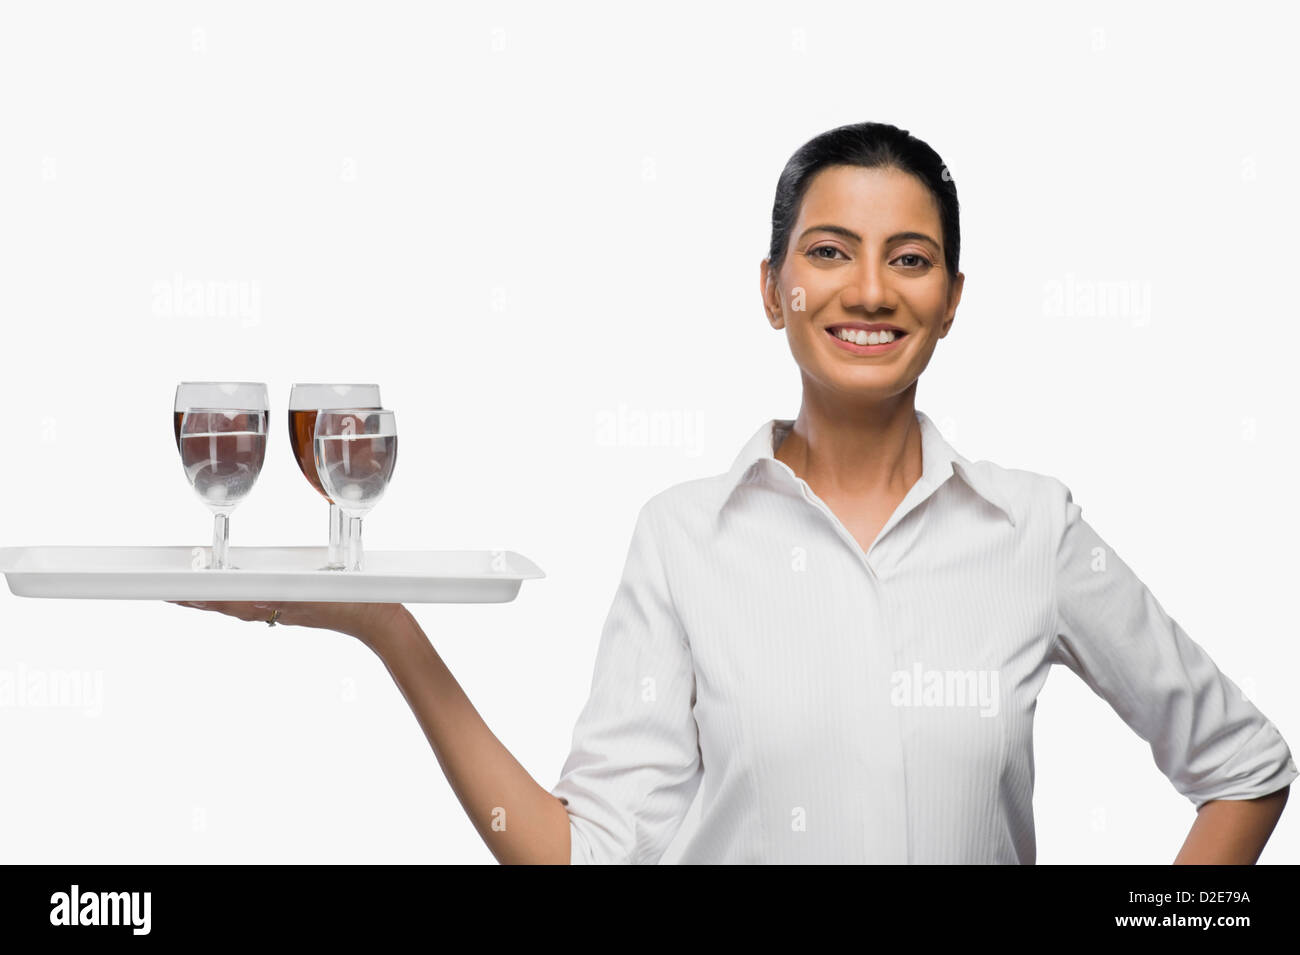 Air hostess carrying a tray of wine glasses Stock Photo